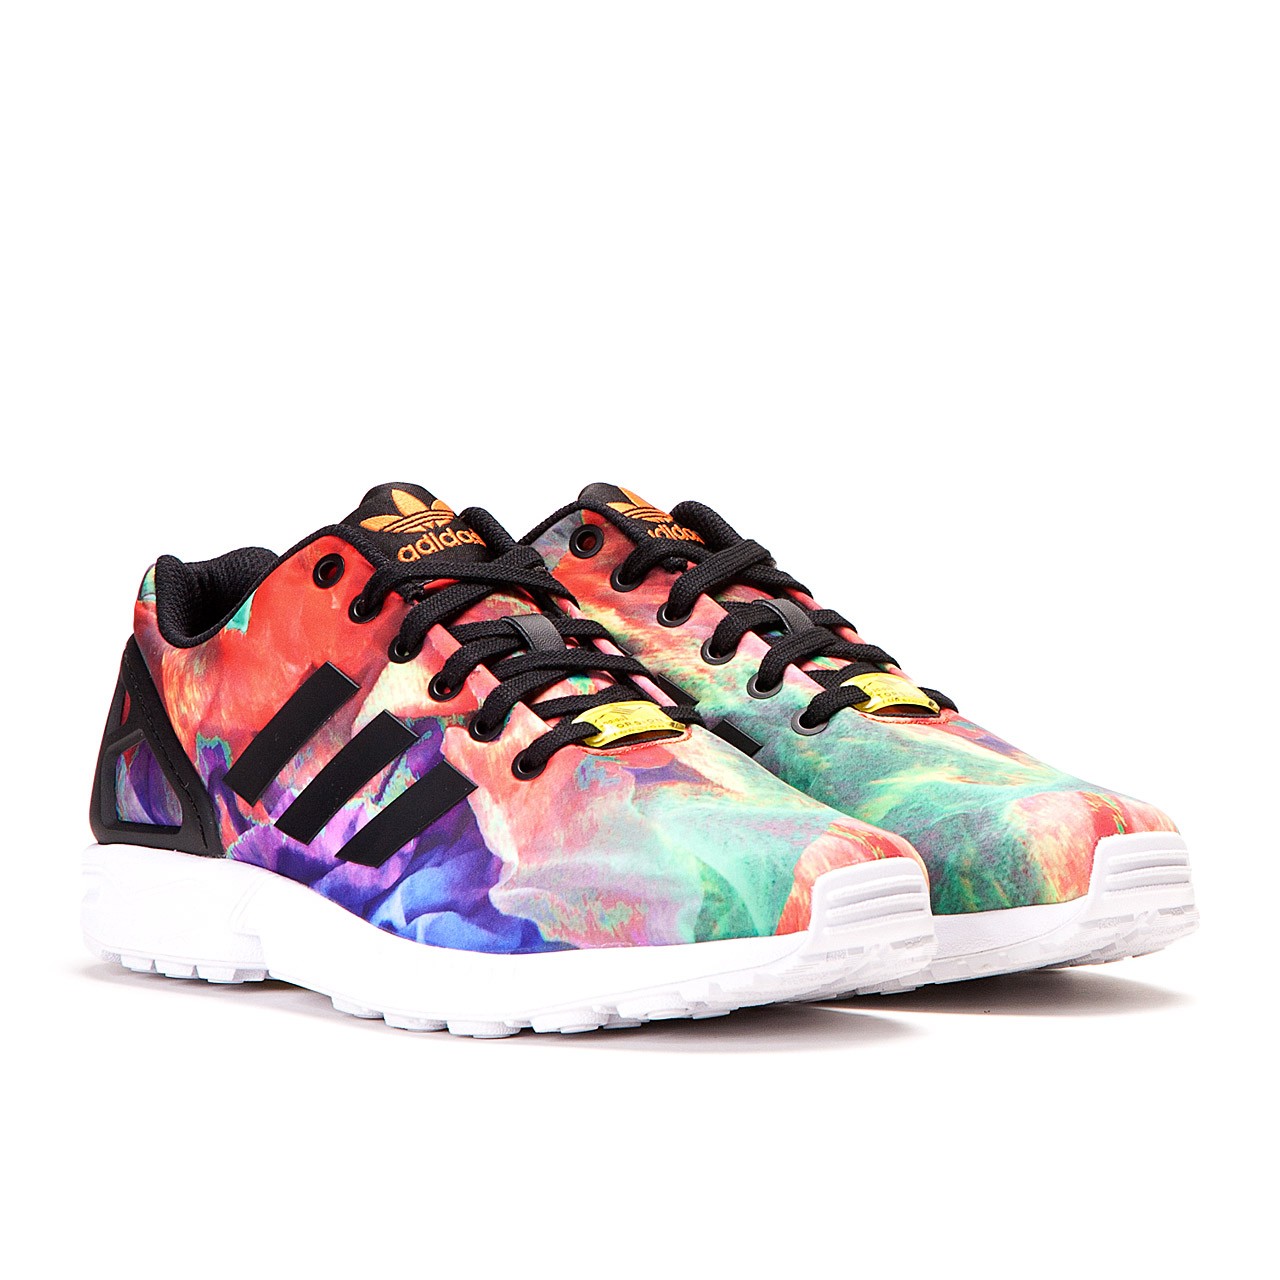 Adidas Zx Torsion Flux Top Sellers, UP TO 62% OFF